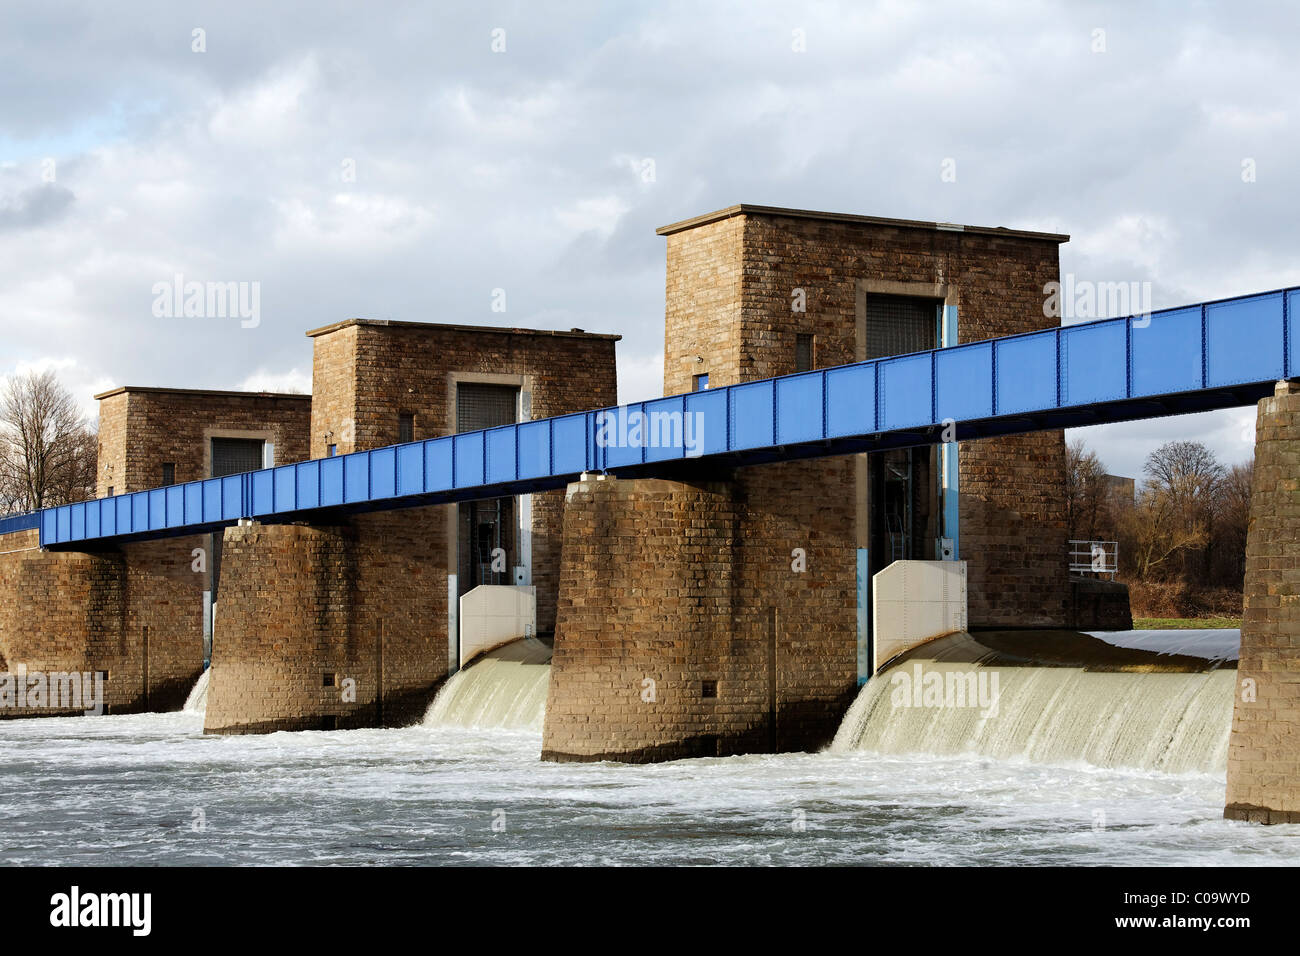 Ruhr river dam and lock, water flowing over the weir, overflow, Duisburg, North Rhine-Westphalia, Germany, Europe Stock Photo